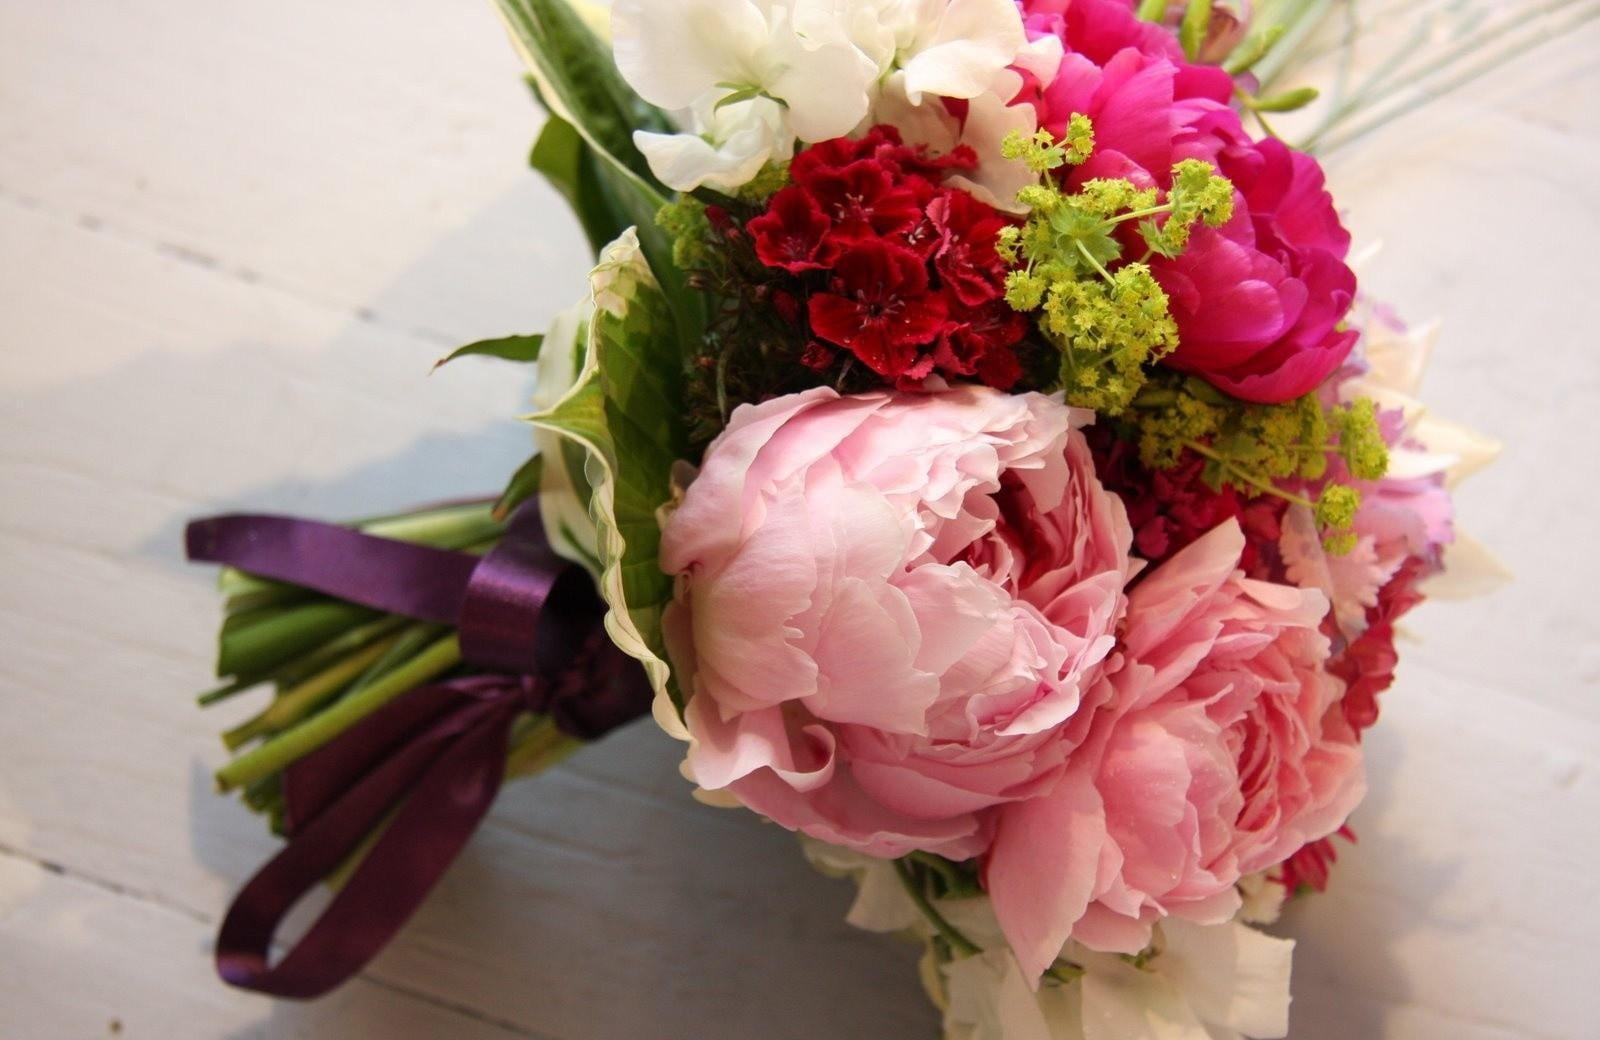 pink, white, and red peonies bouquet, peony, freesia, flowers